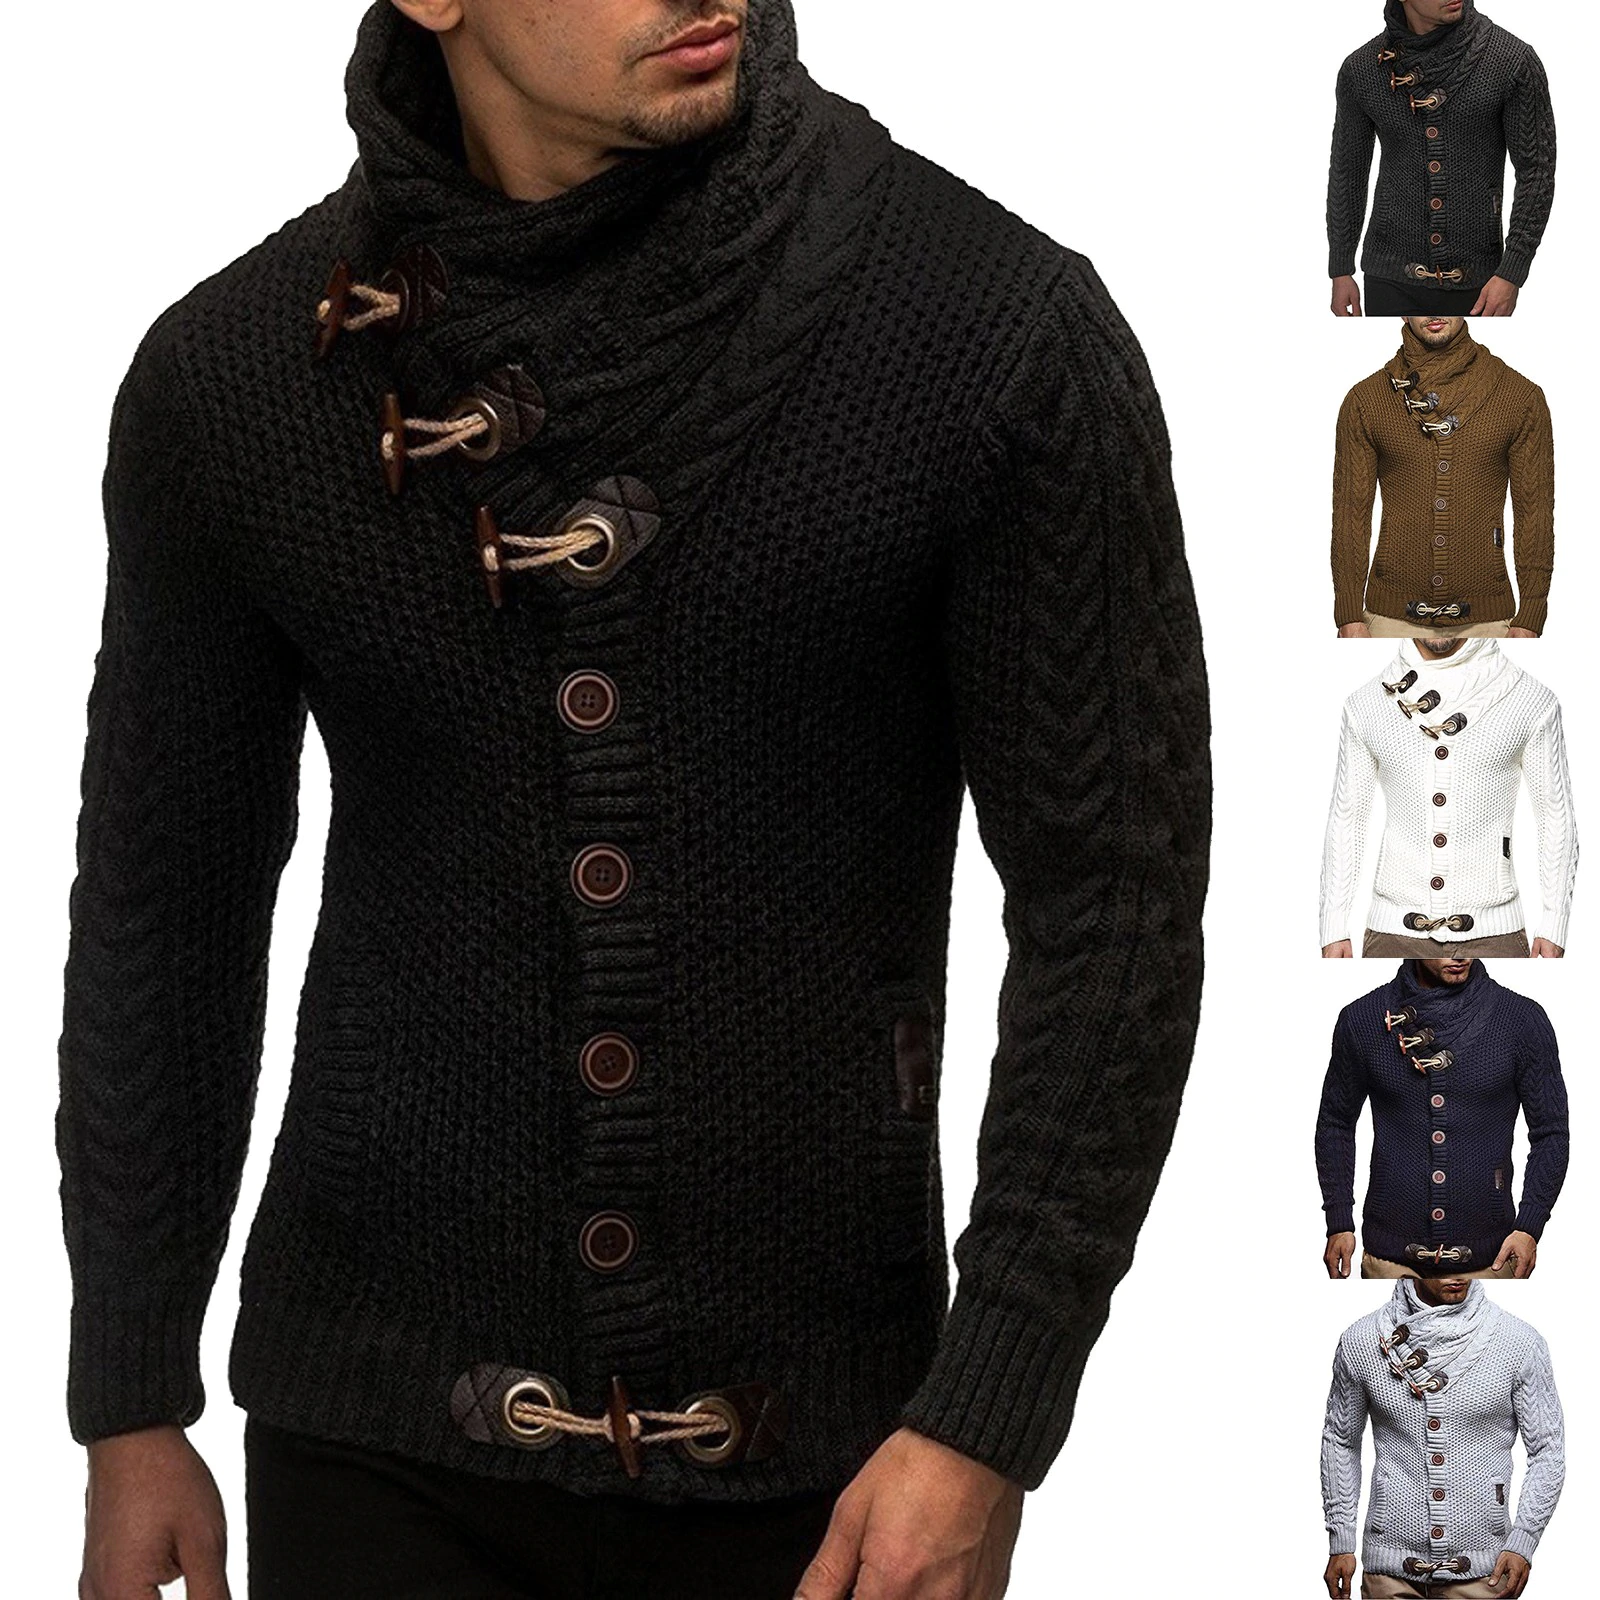 Autumn Winter Sweater Man Turtleneck Knitted Cardigan Solid Color Plus Size Clothing Tops Pullovers Warm Basic Sweaters